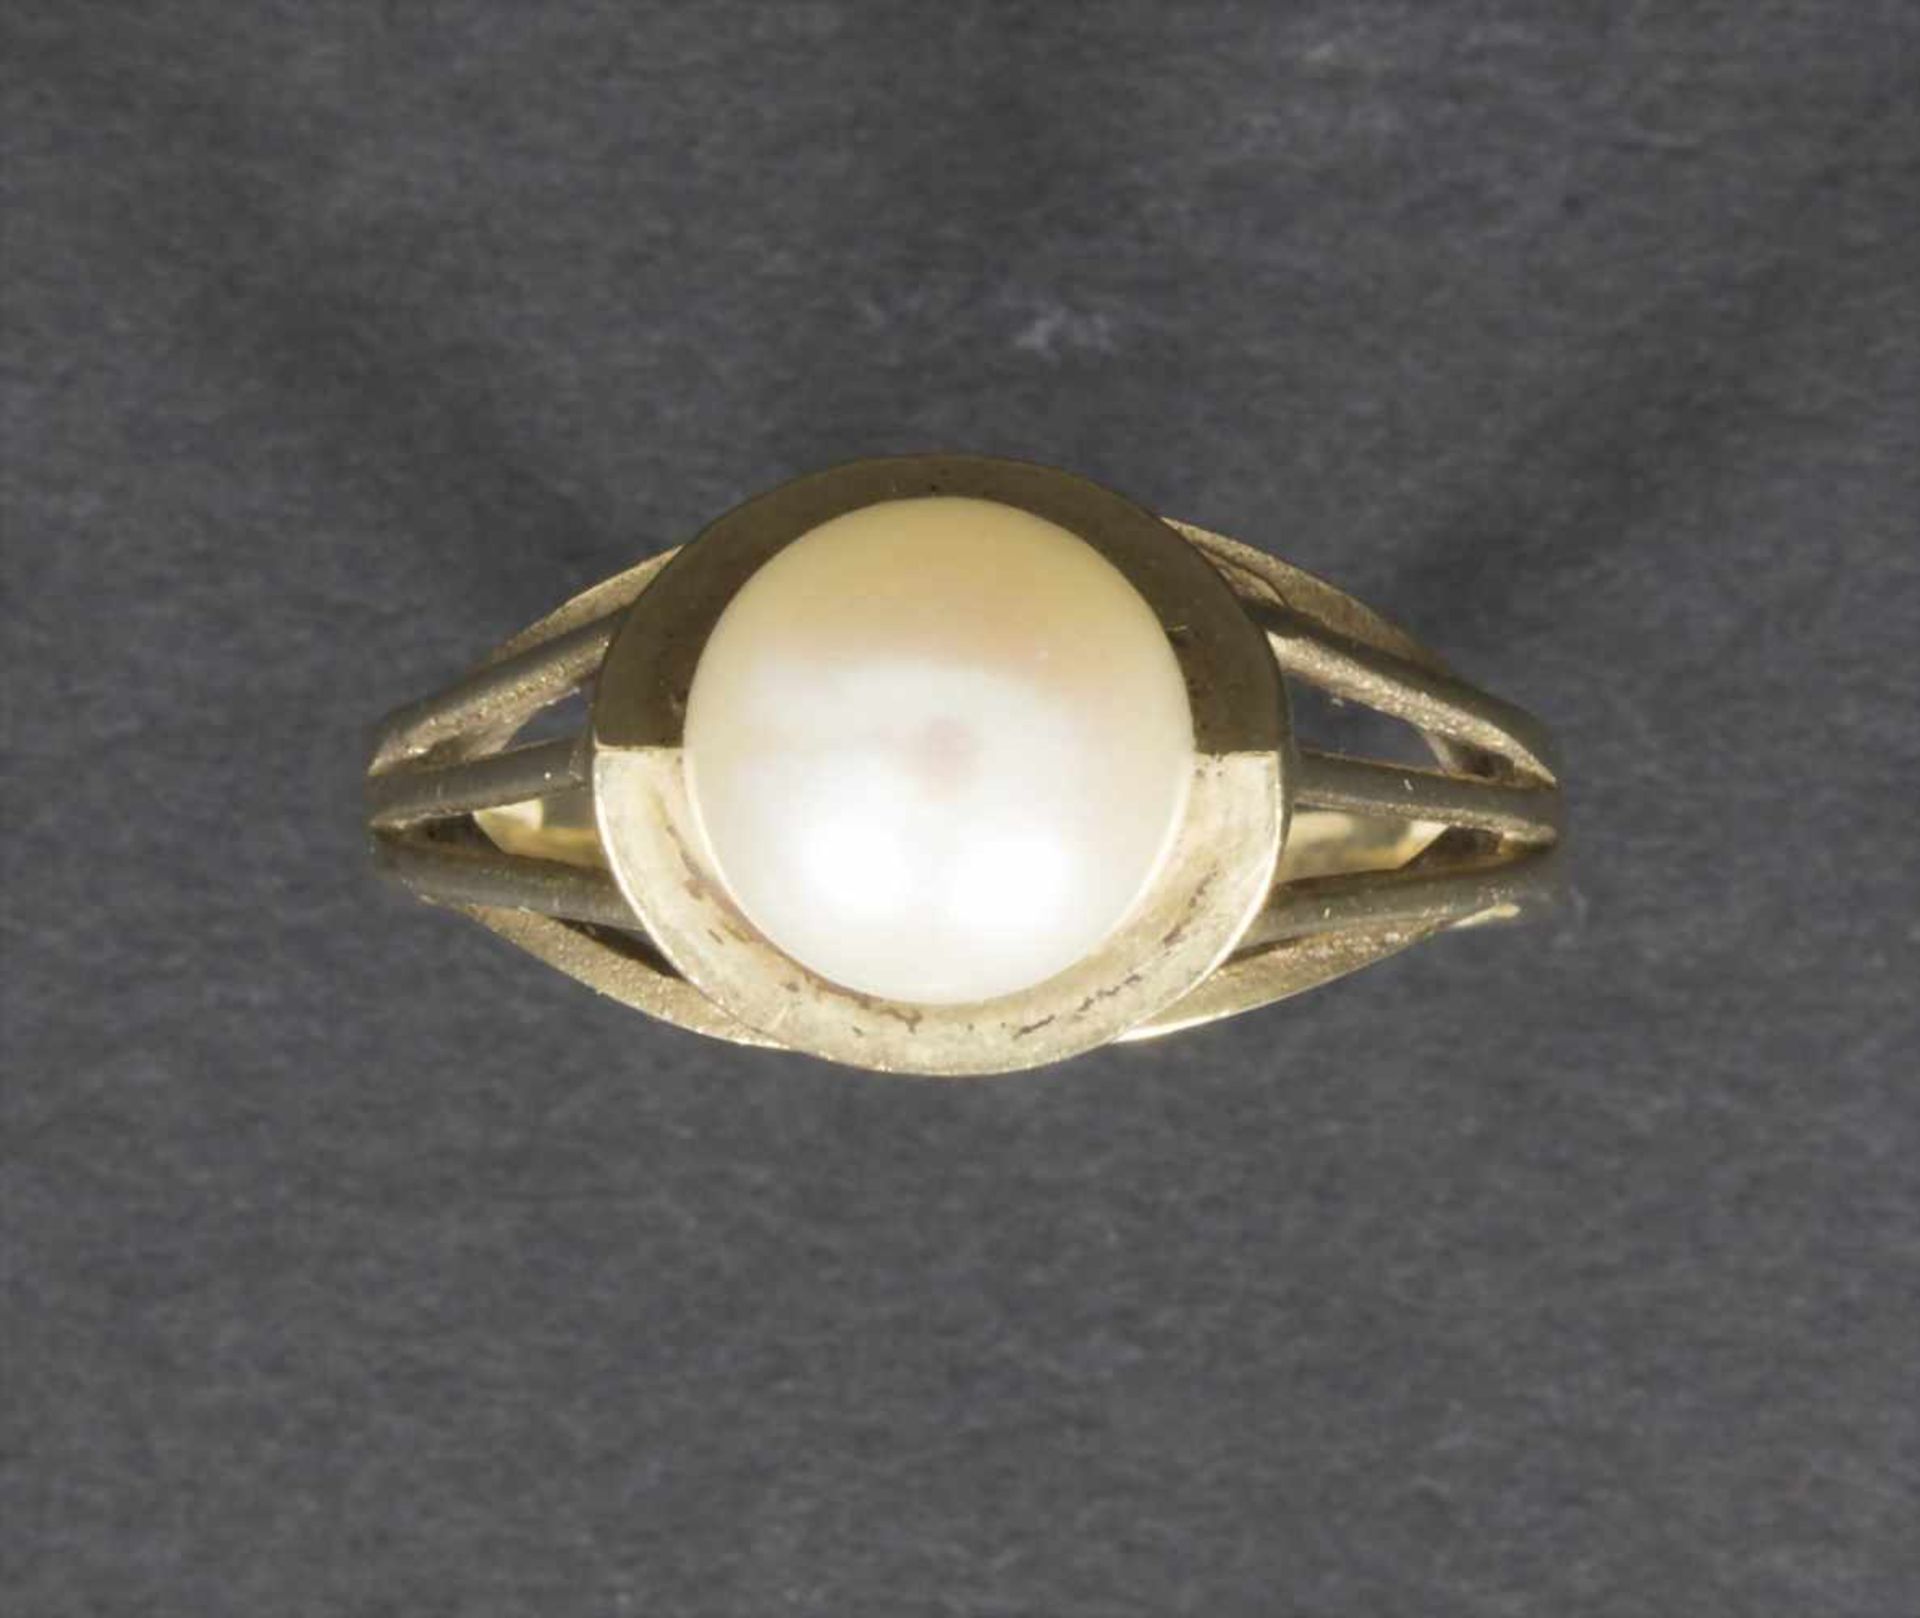 Damenring mit Perle / A ladies ring with a pearlMaterial: 8 Kt.333/000 Gold, Perle,Gewicht: 2,6 g,